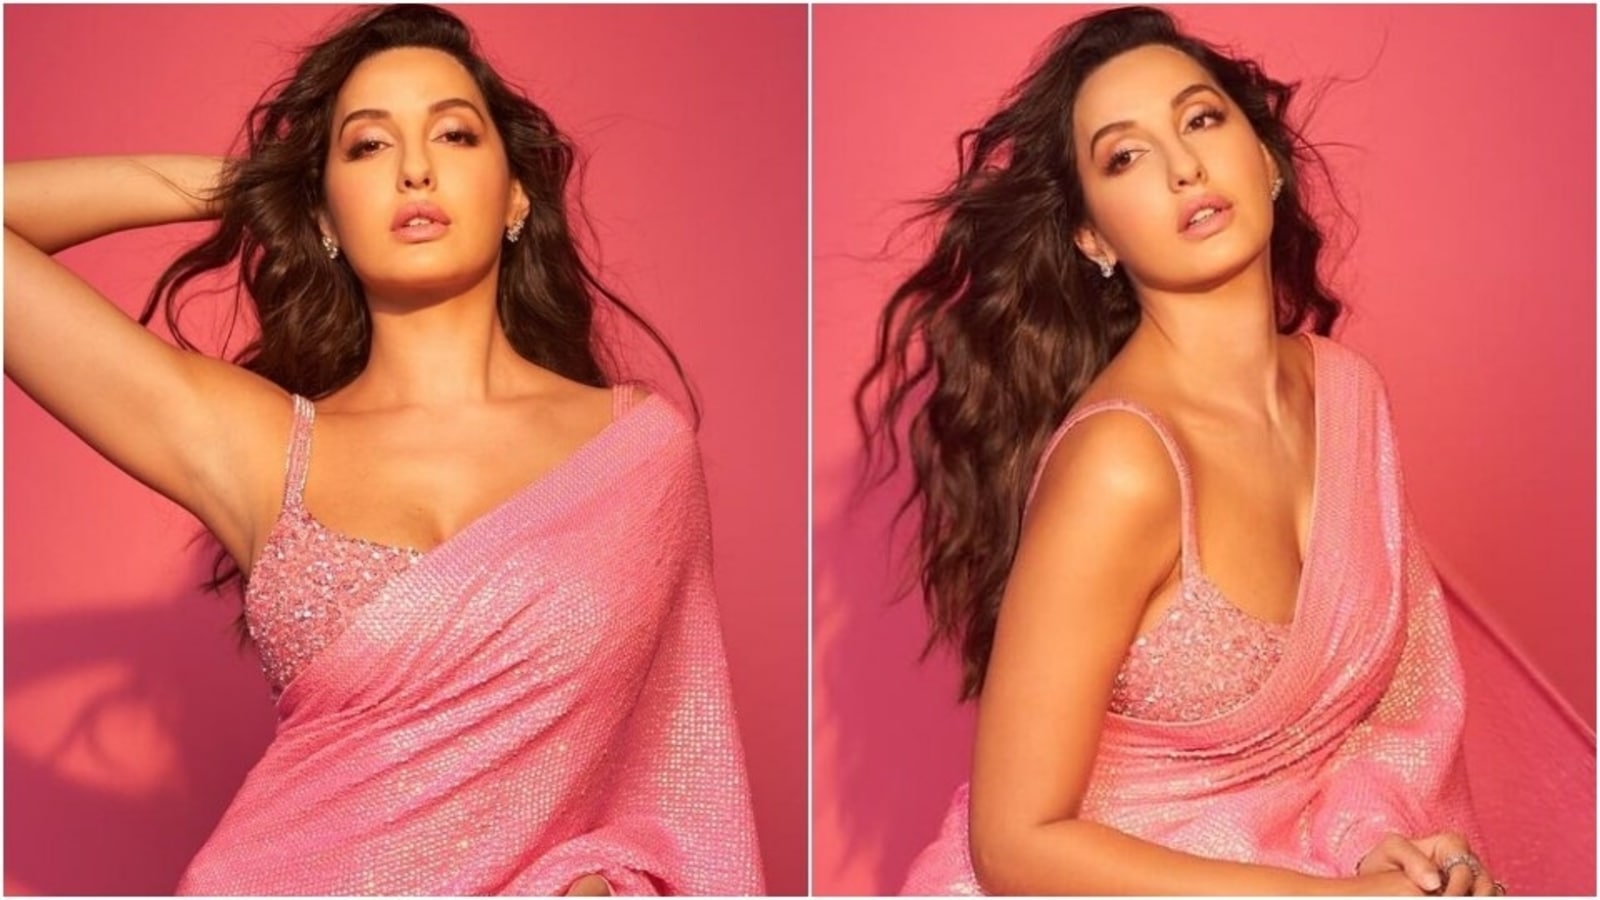 Nora Fatehi turns up the heat in jaw-dropping sequin bralette and